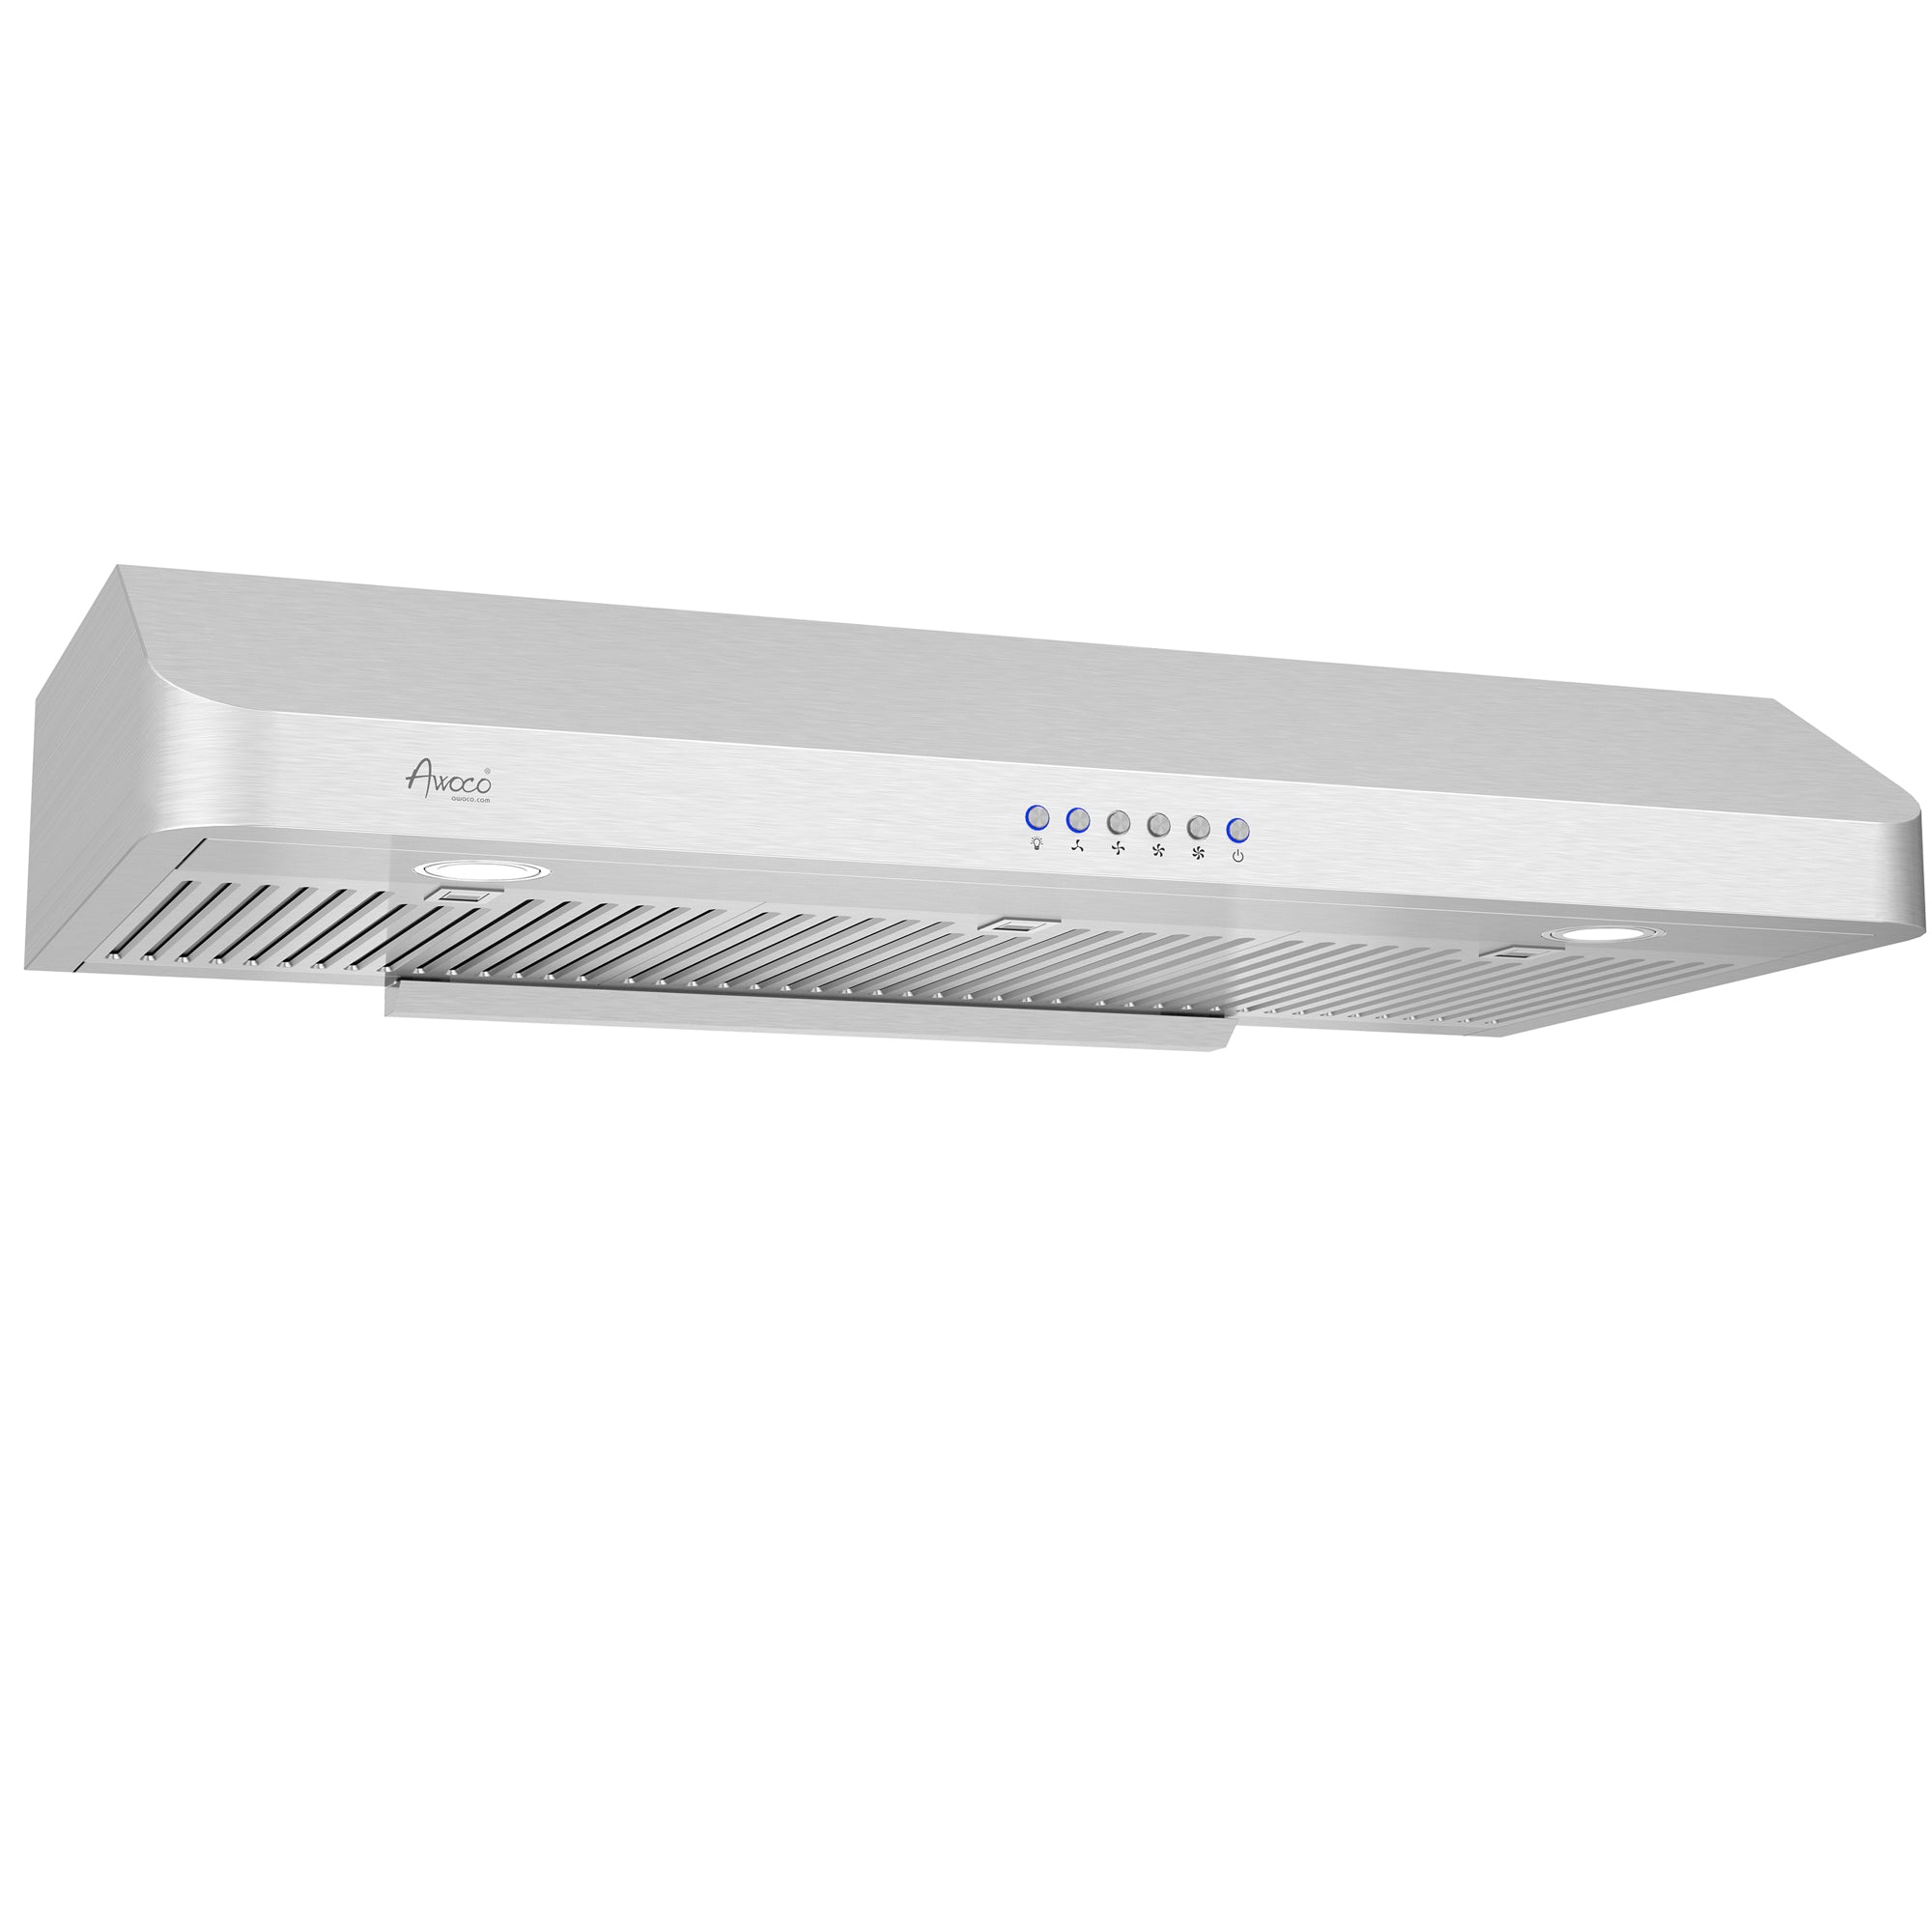 Awoco RH-R06-36 Rectangle Vent 6" High Stainless Steel Under Cabinet 4 Speeds 900CFM Range Hood with LED Lights